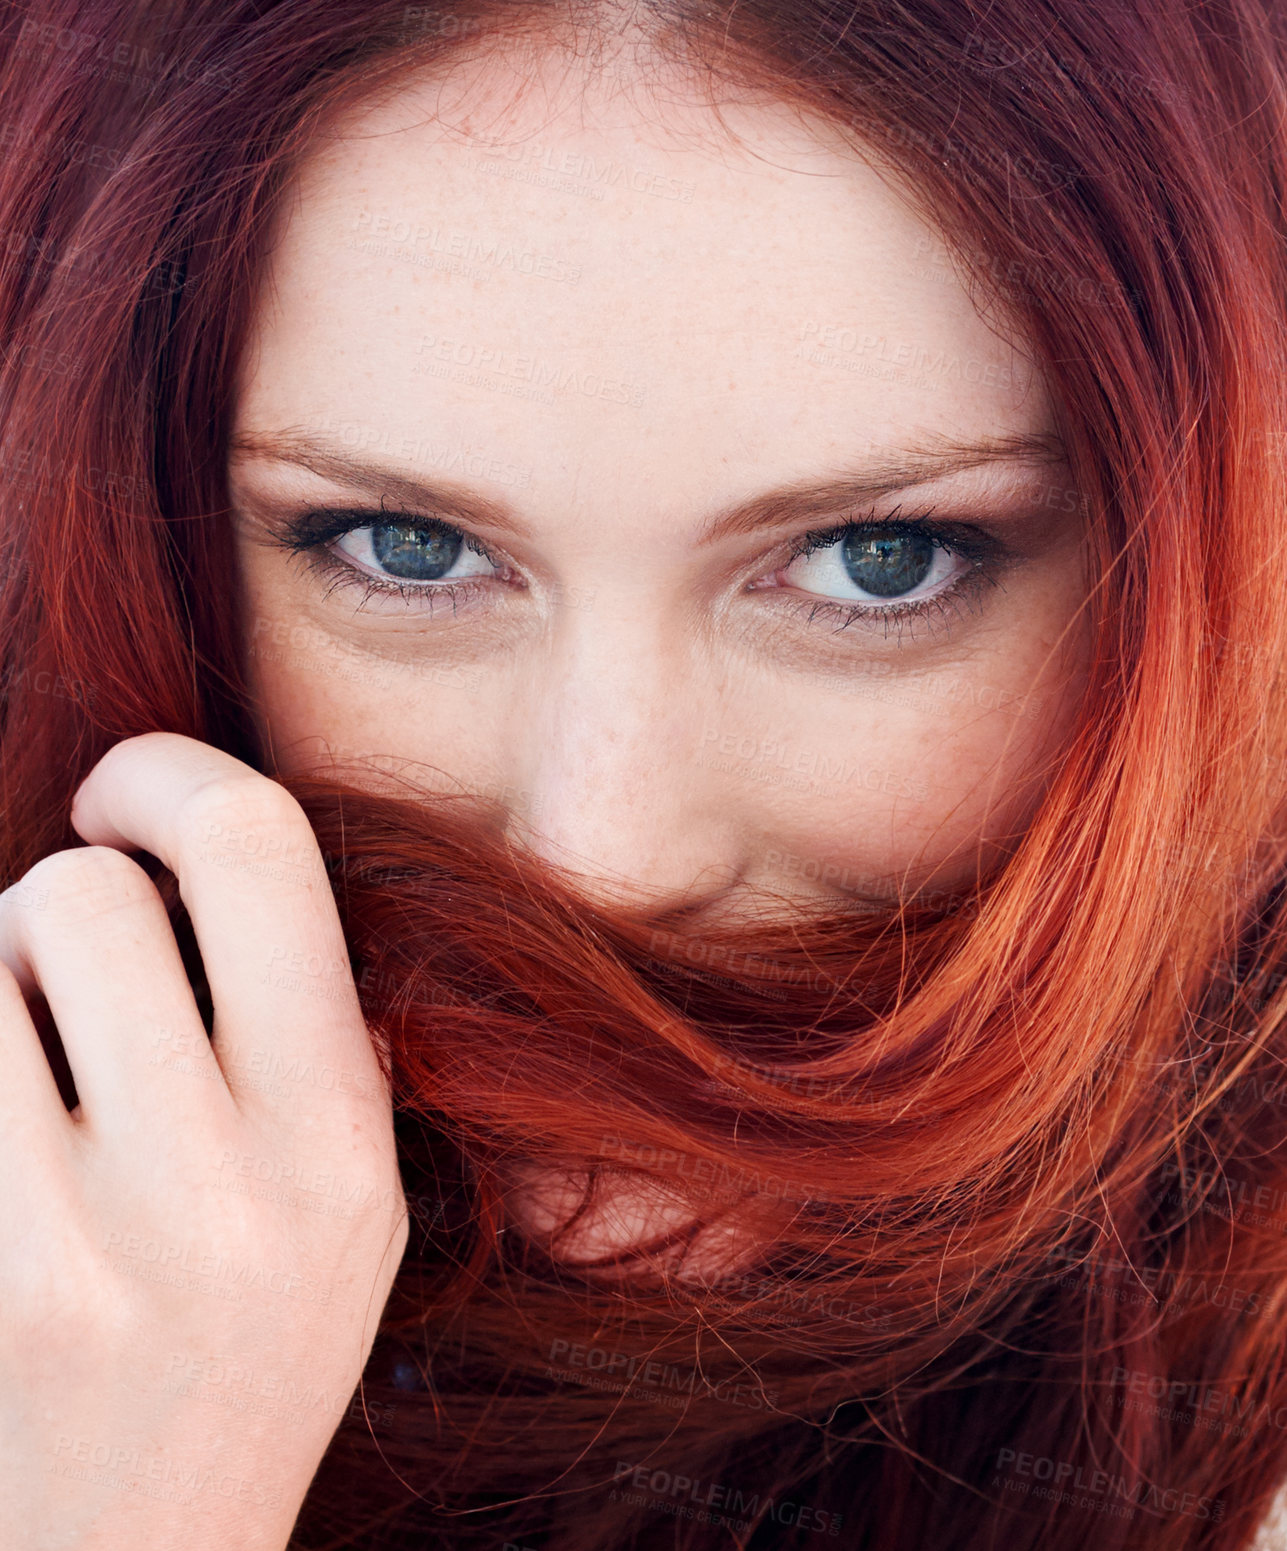 Buy stock photo Haircare, portrait and woman with red hair over mouth for keratin, brazilian or botox treatment. Health, wellness and face of a female model with a clean, long and beautiful hairstyle for self care.